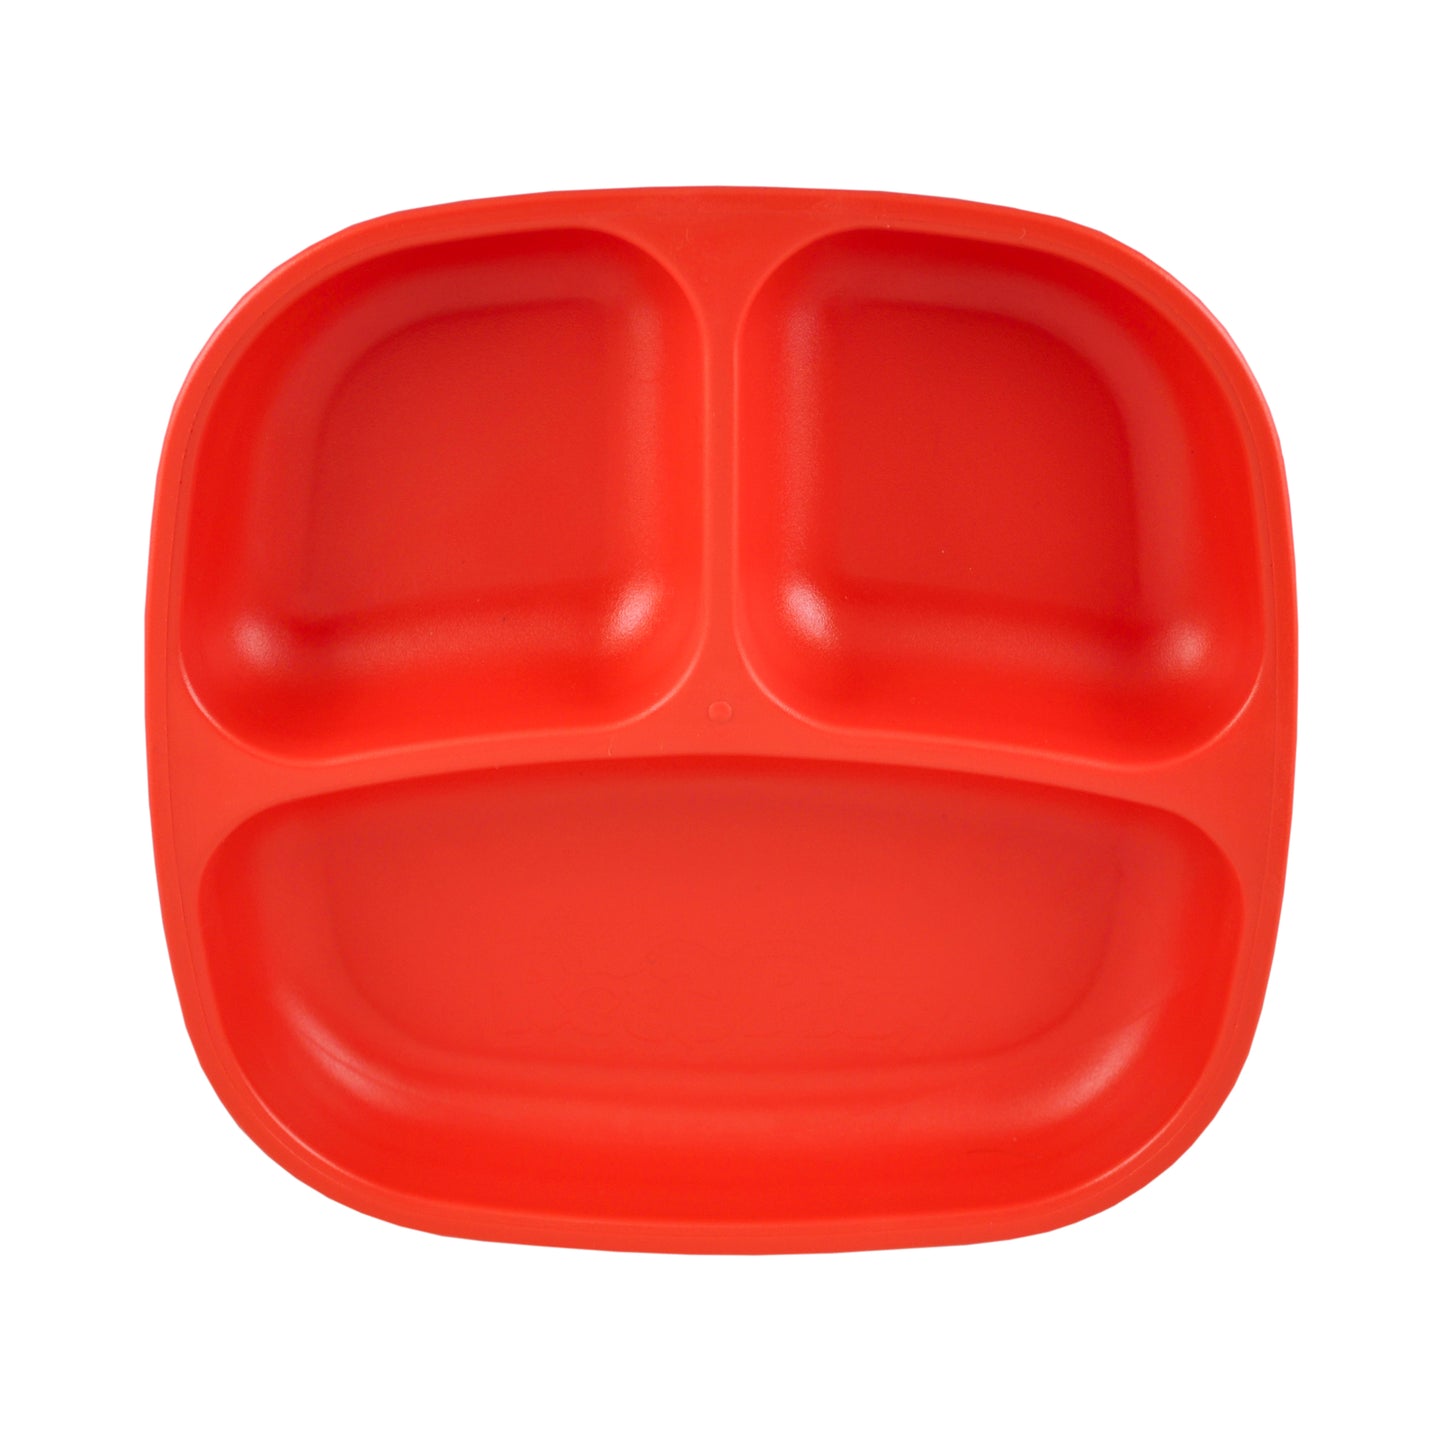 Replay Divider Plate Red